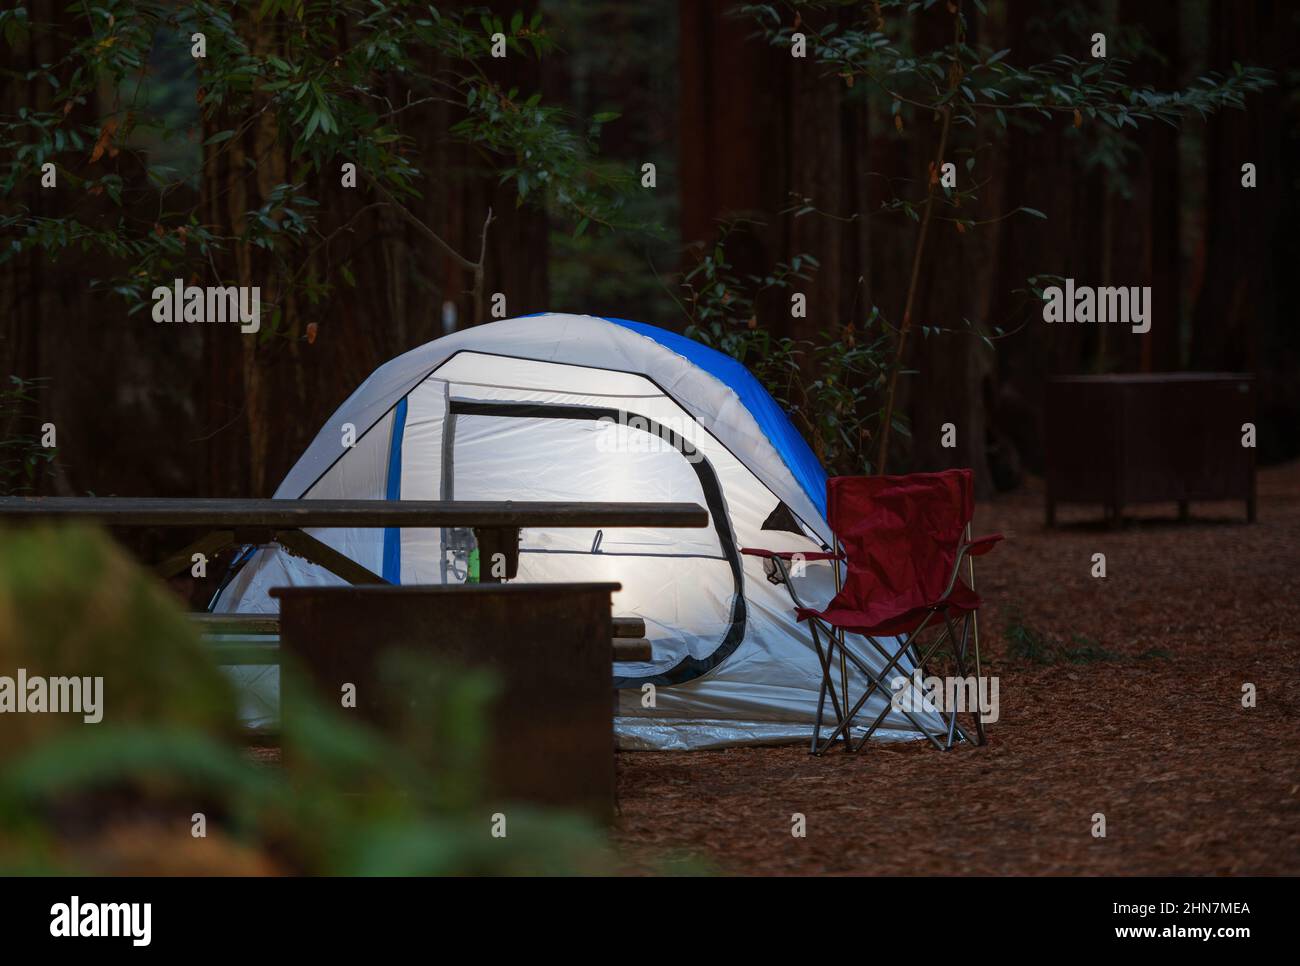 Tent Camping in the Woodland. Illuminated Tent Between Redwood Trees. Recreational Theme. Stock Photo